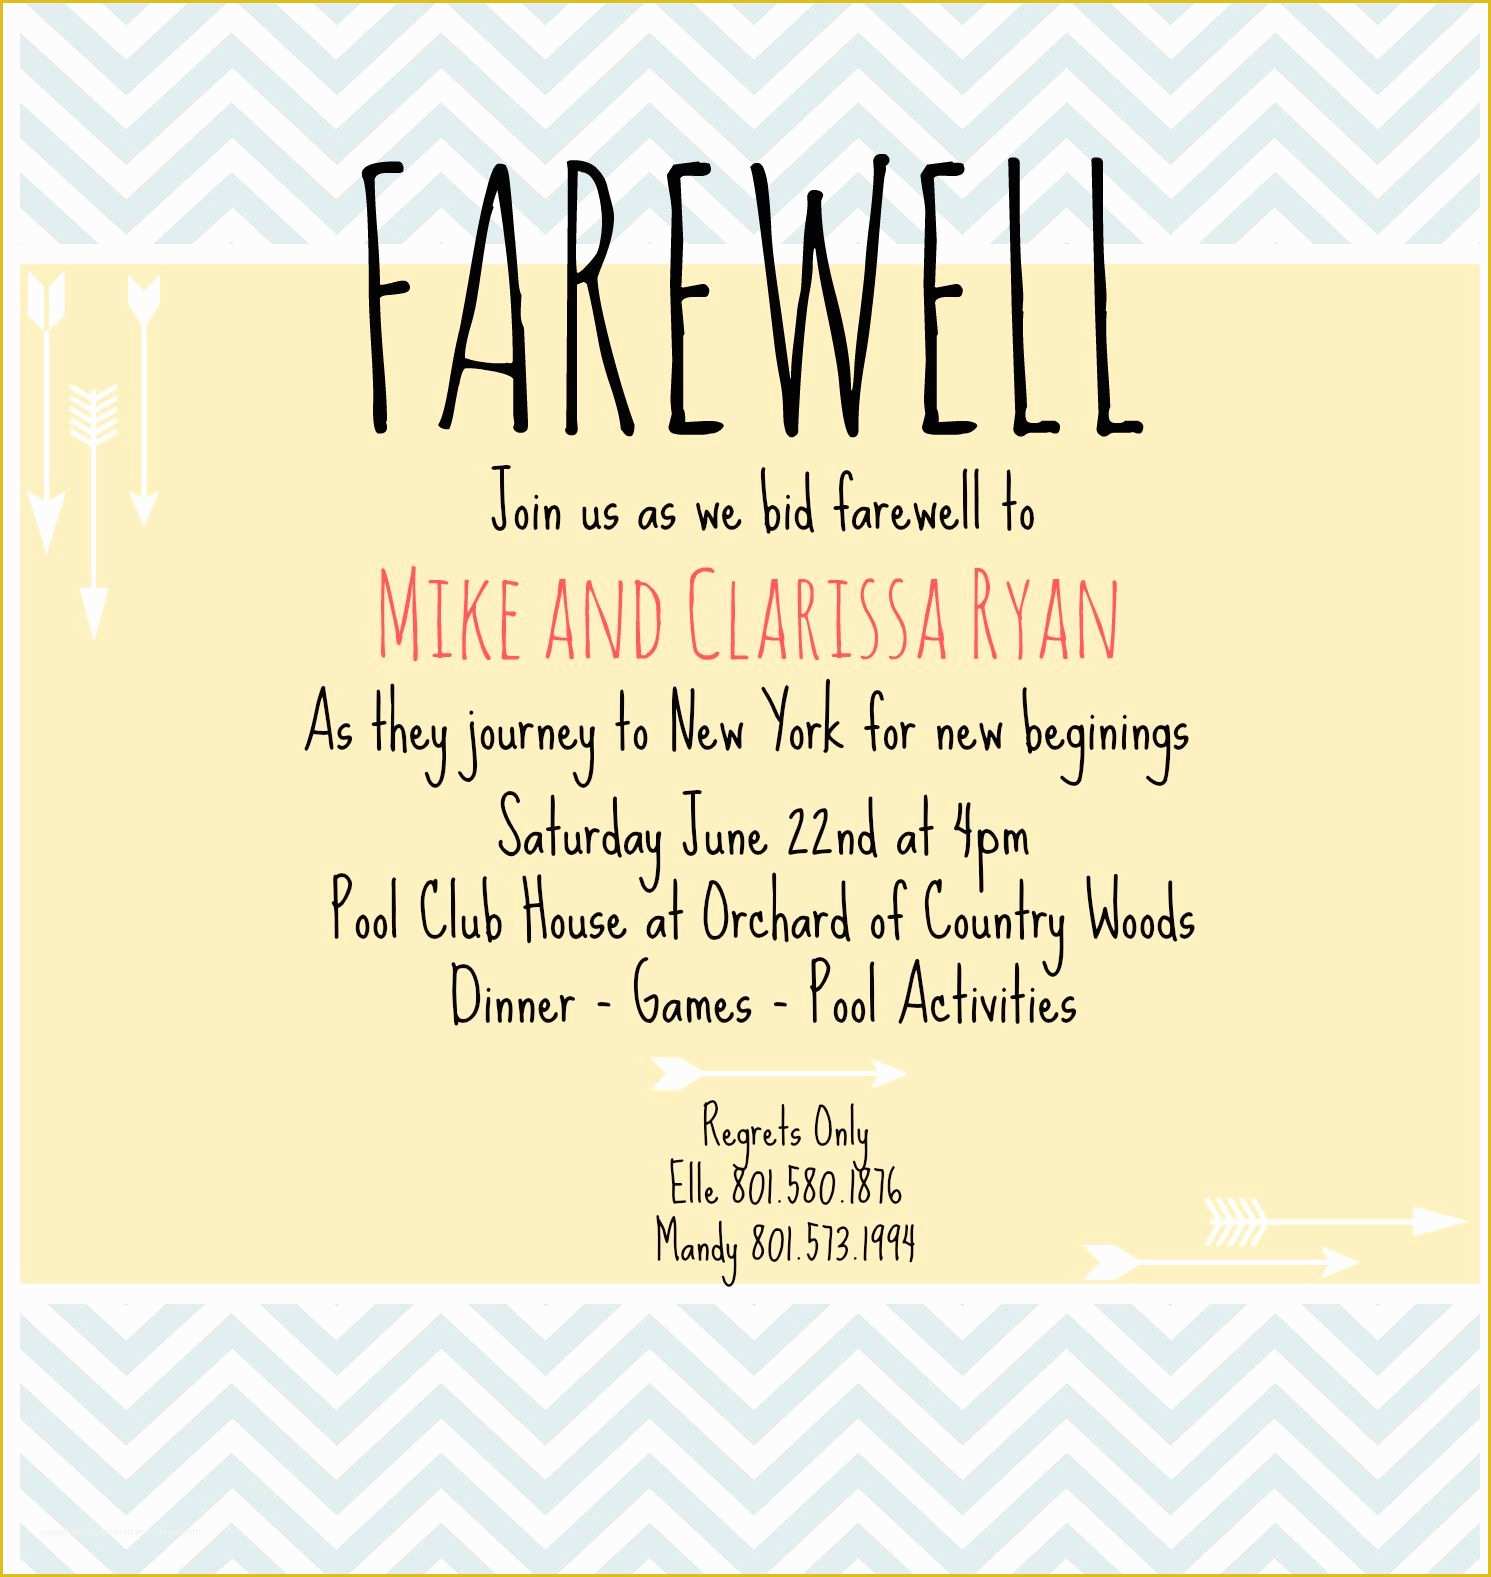 Free Printable Invitation Templates Going Away Party Of Farewell Invite Picmonkey Creations